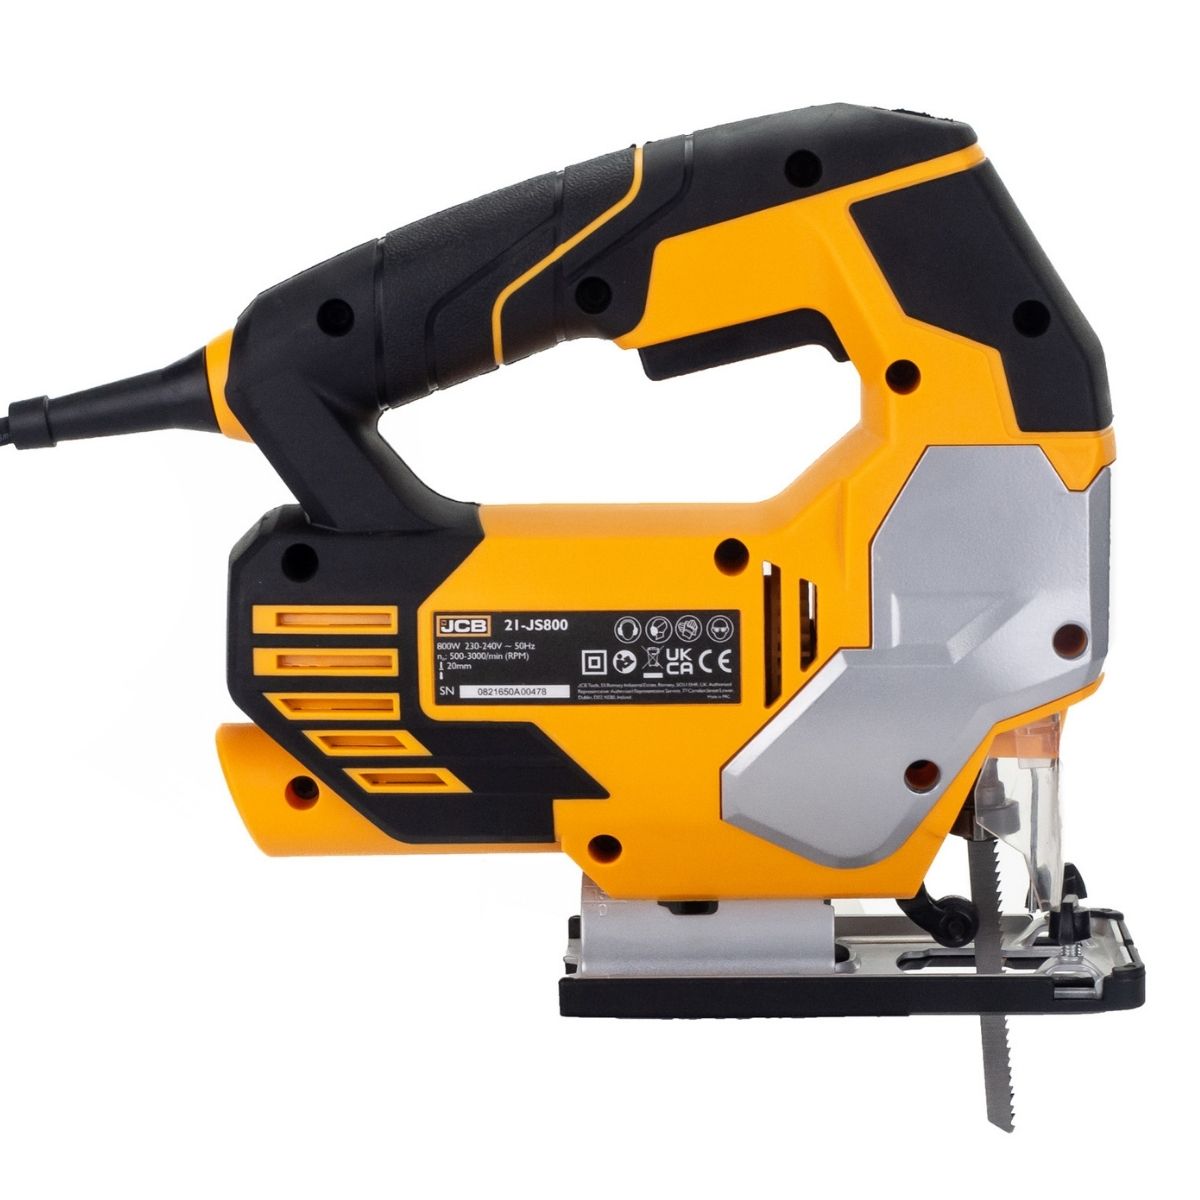 JCB 21-JS800 Corded Jigsaw with 4 Stage Pendulum & Action Quick Blade Change 240V/800W